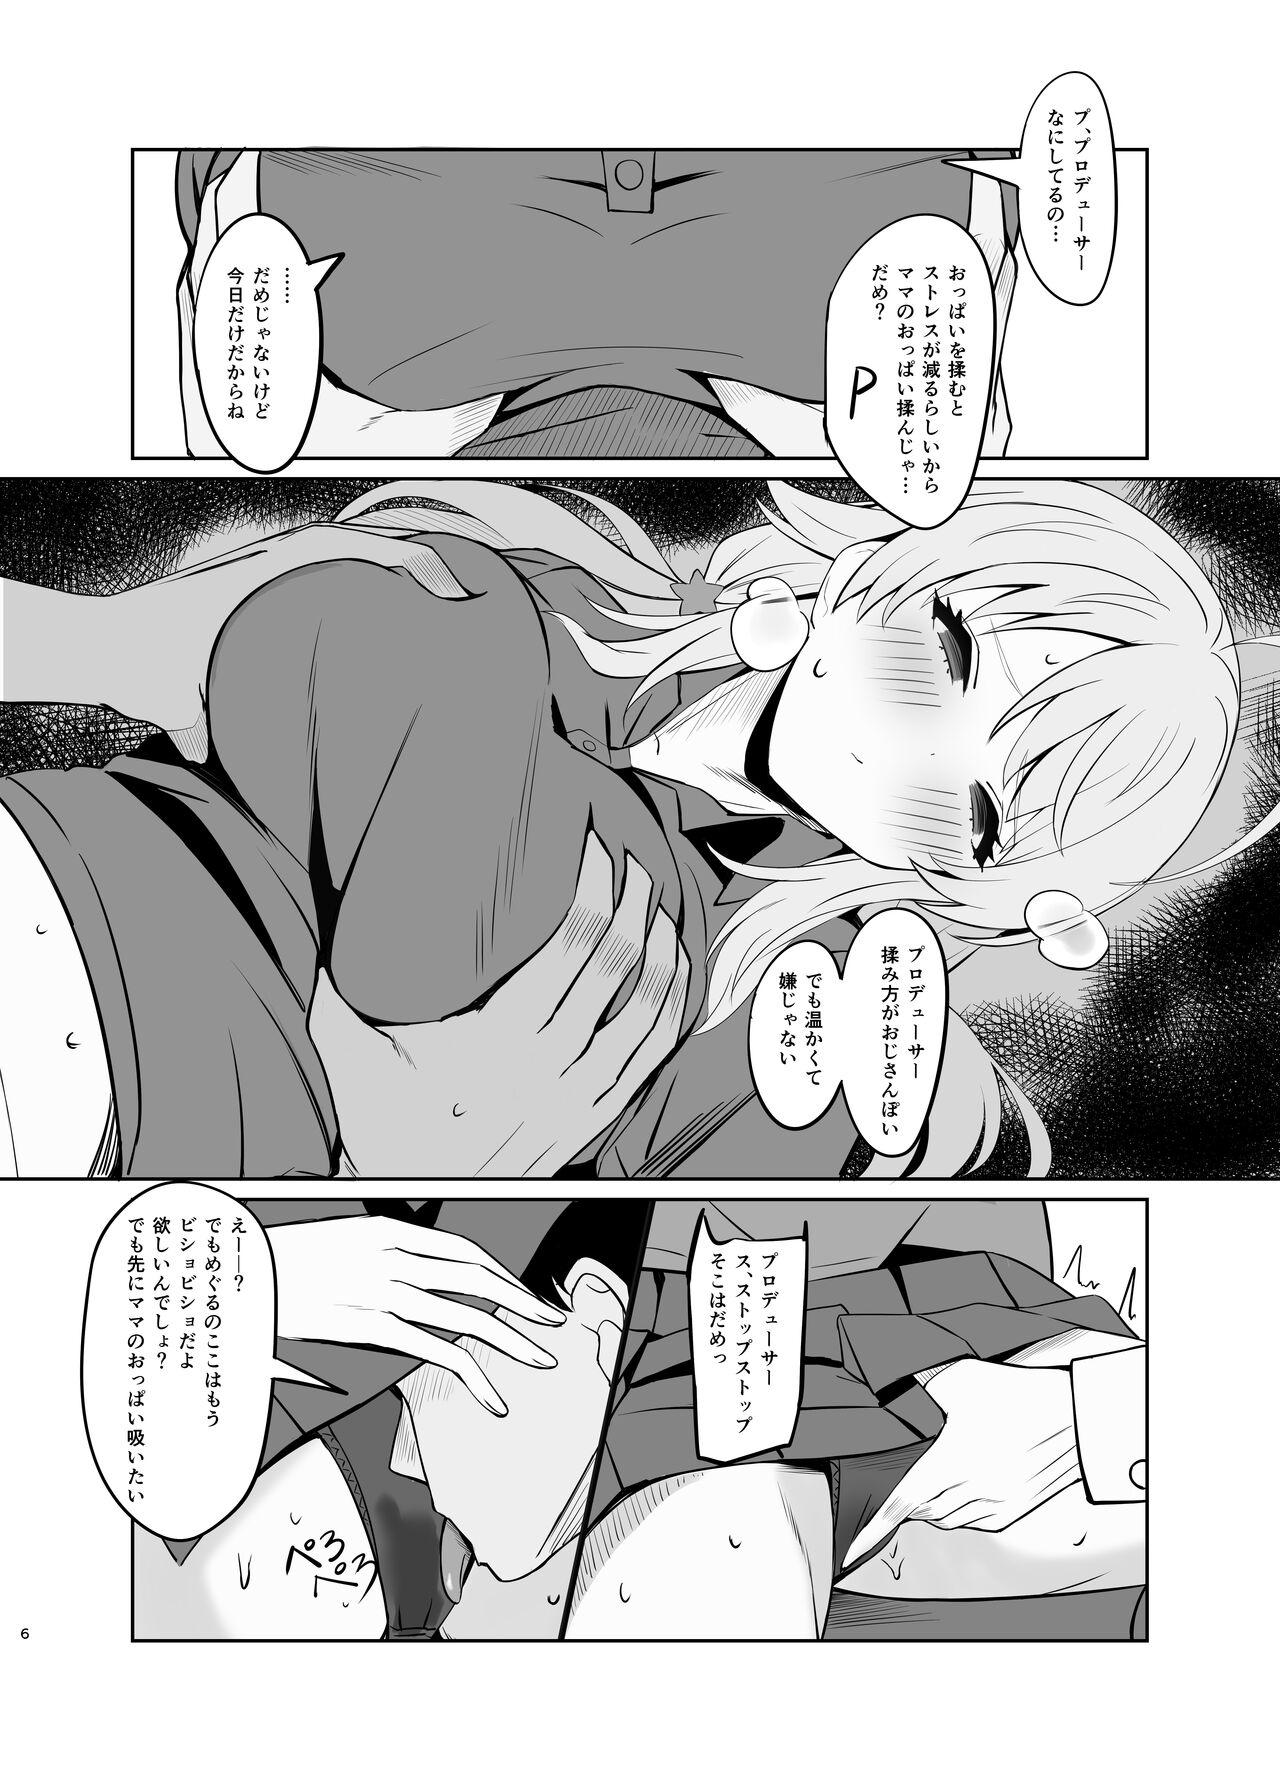 Blowing 癒やしTIME - The idolmaster Blowjob - Page 4